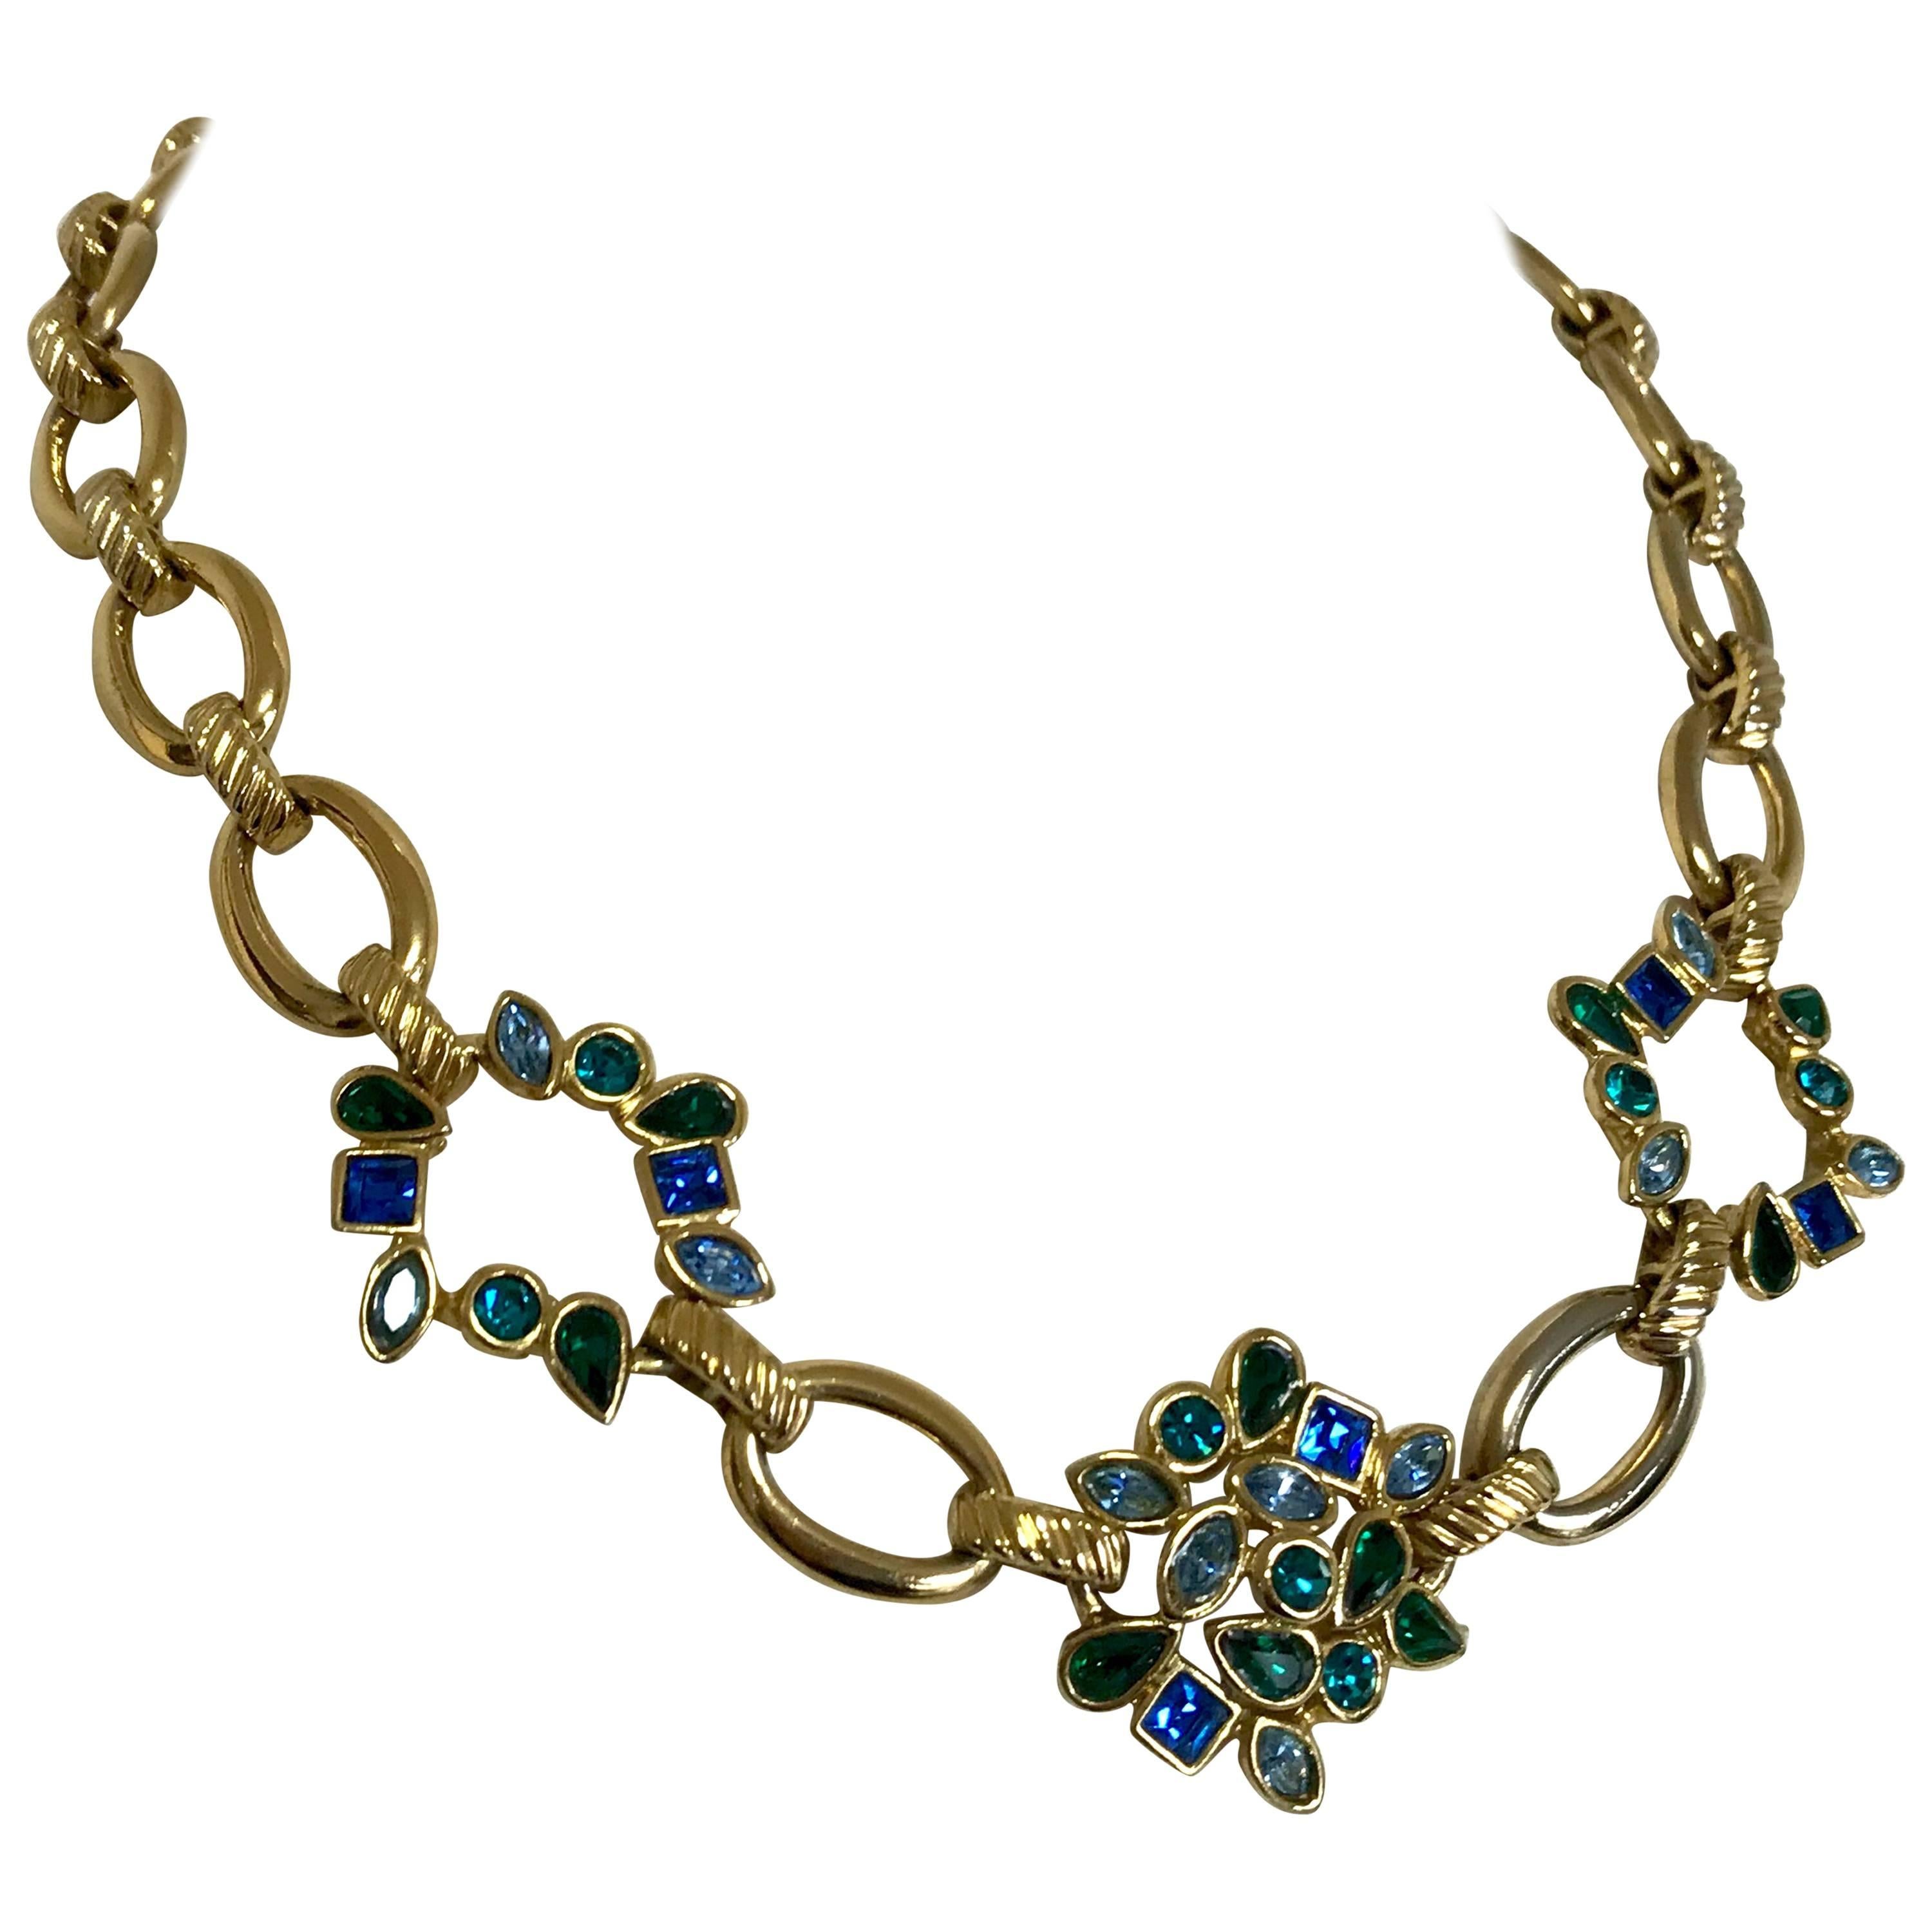 Vintage Yves Saint Laurent, YSL Golden Chain Necklace with Blue and Green Stones For Sale